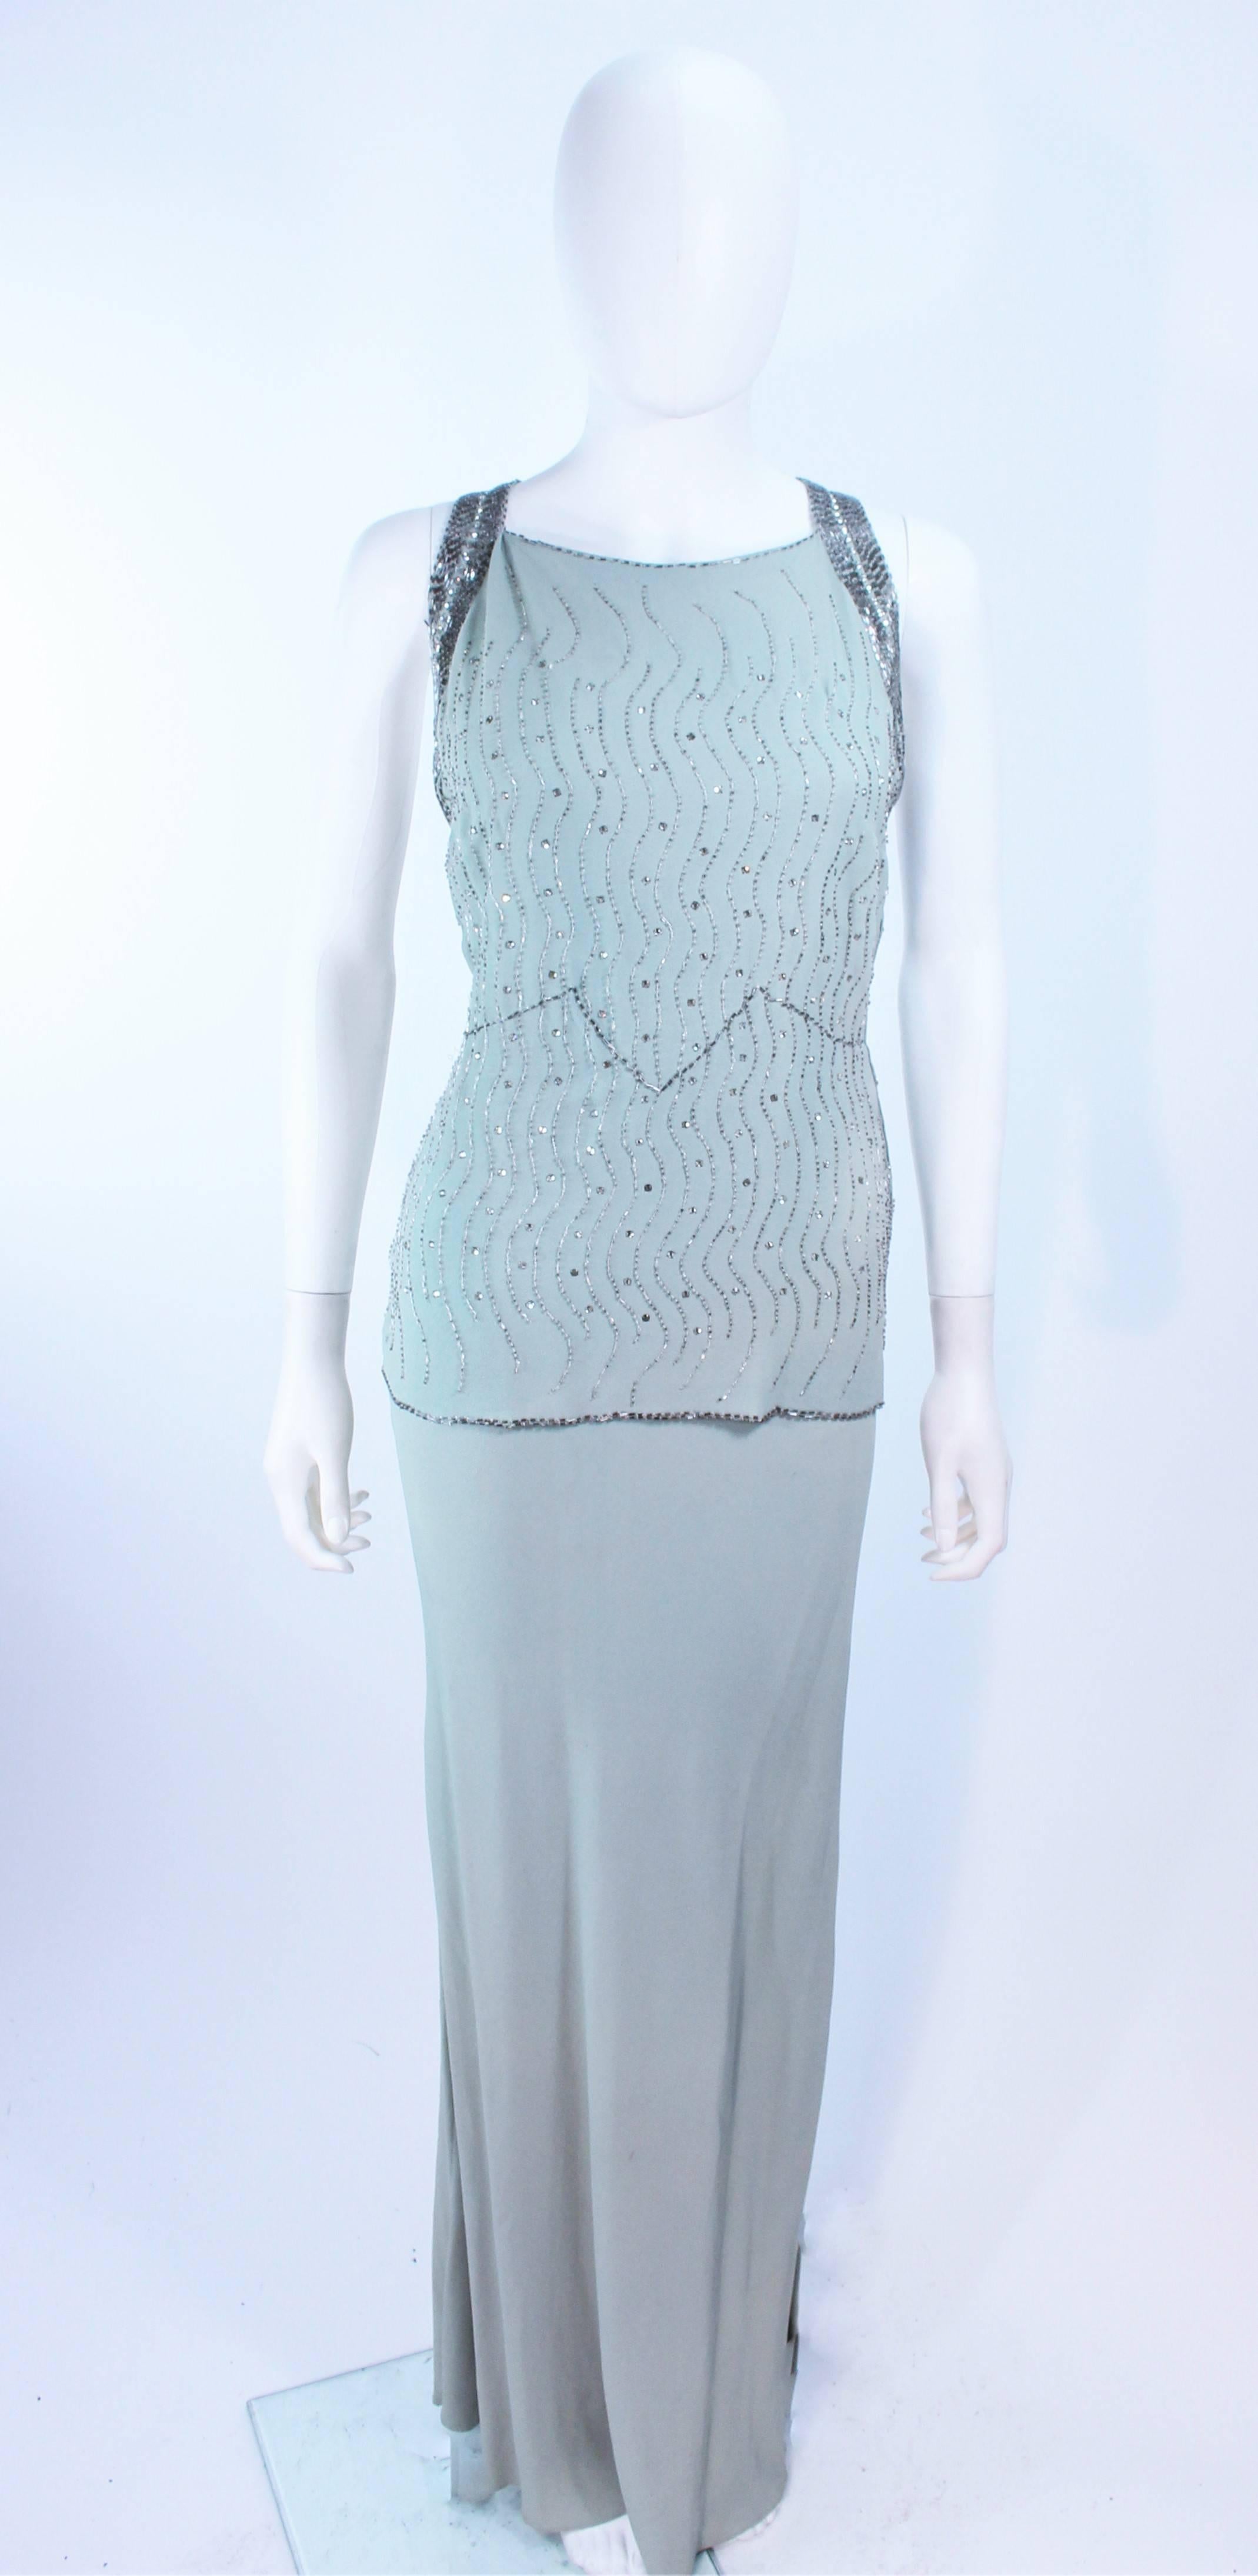 This vintage 1930's gown is composed of a bias cut aqua silk crepe. Features rhinestone and beaded applique throughout. There are side snap closures. In excellent vintage condition, there is discoloration due to age throughout (see photos). Due to